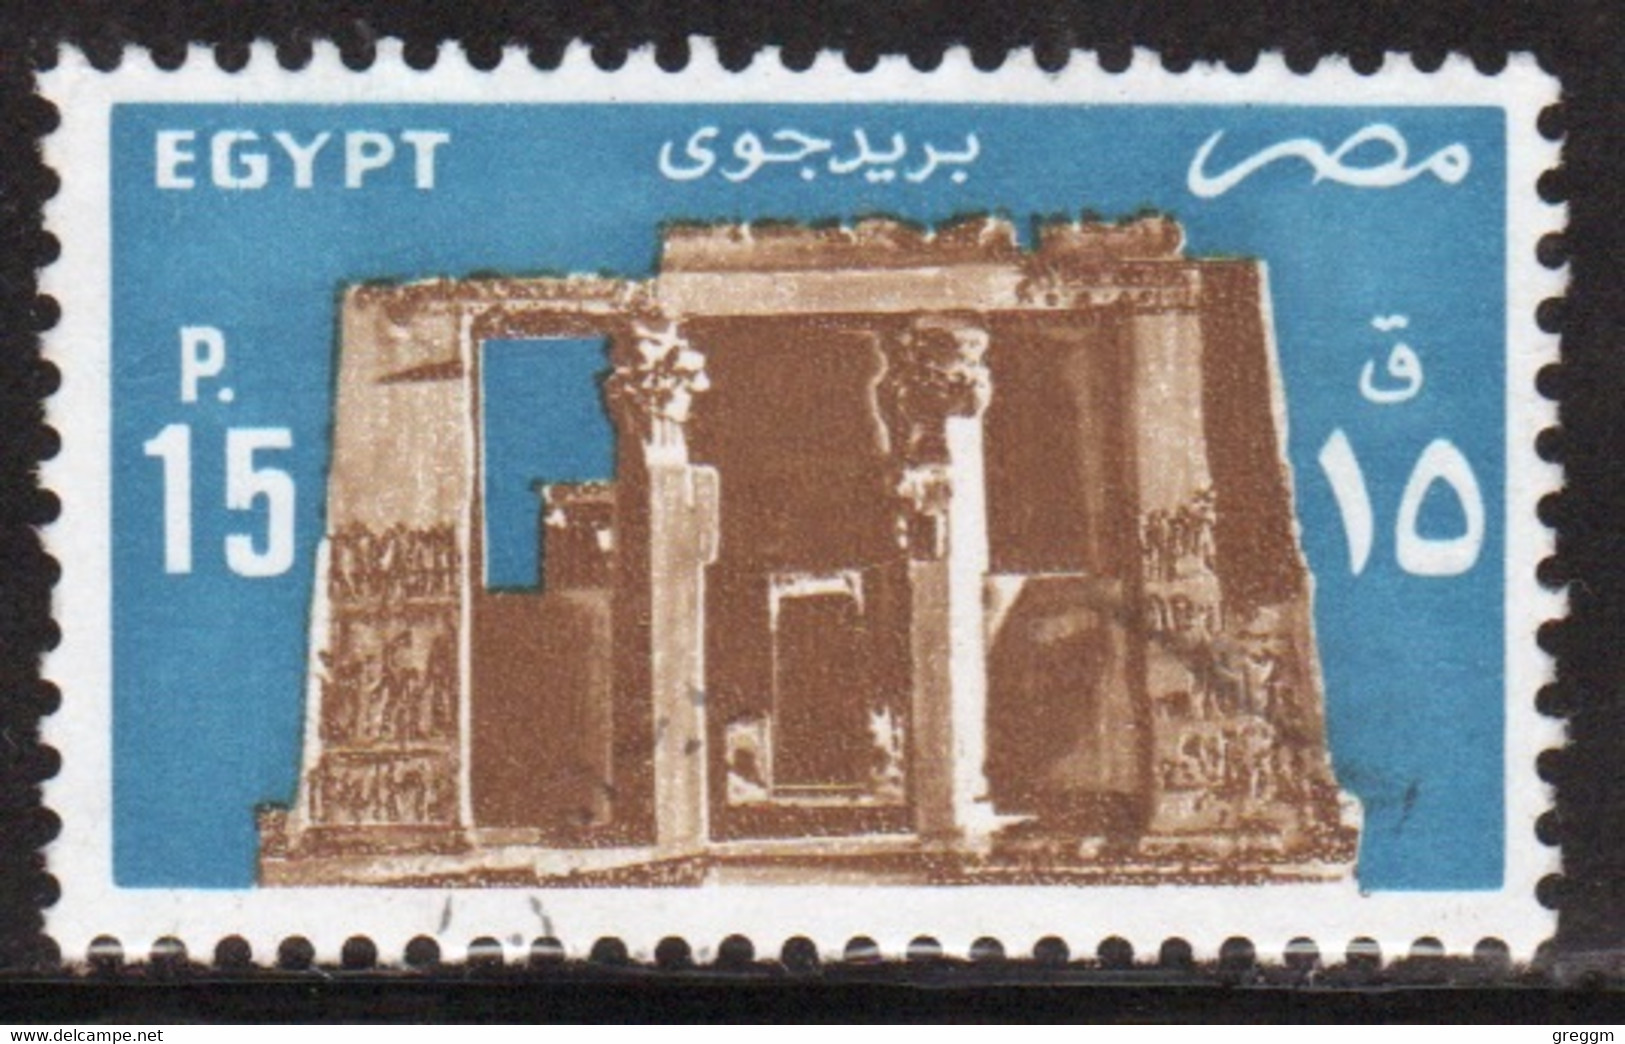 Egypt UAR 1985 Single 15p Stamp Issued To Celebrate Air Mail In Fine Used - Gebraucht